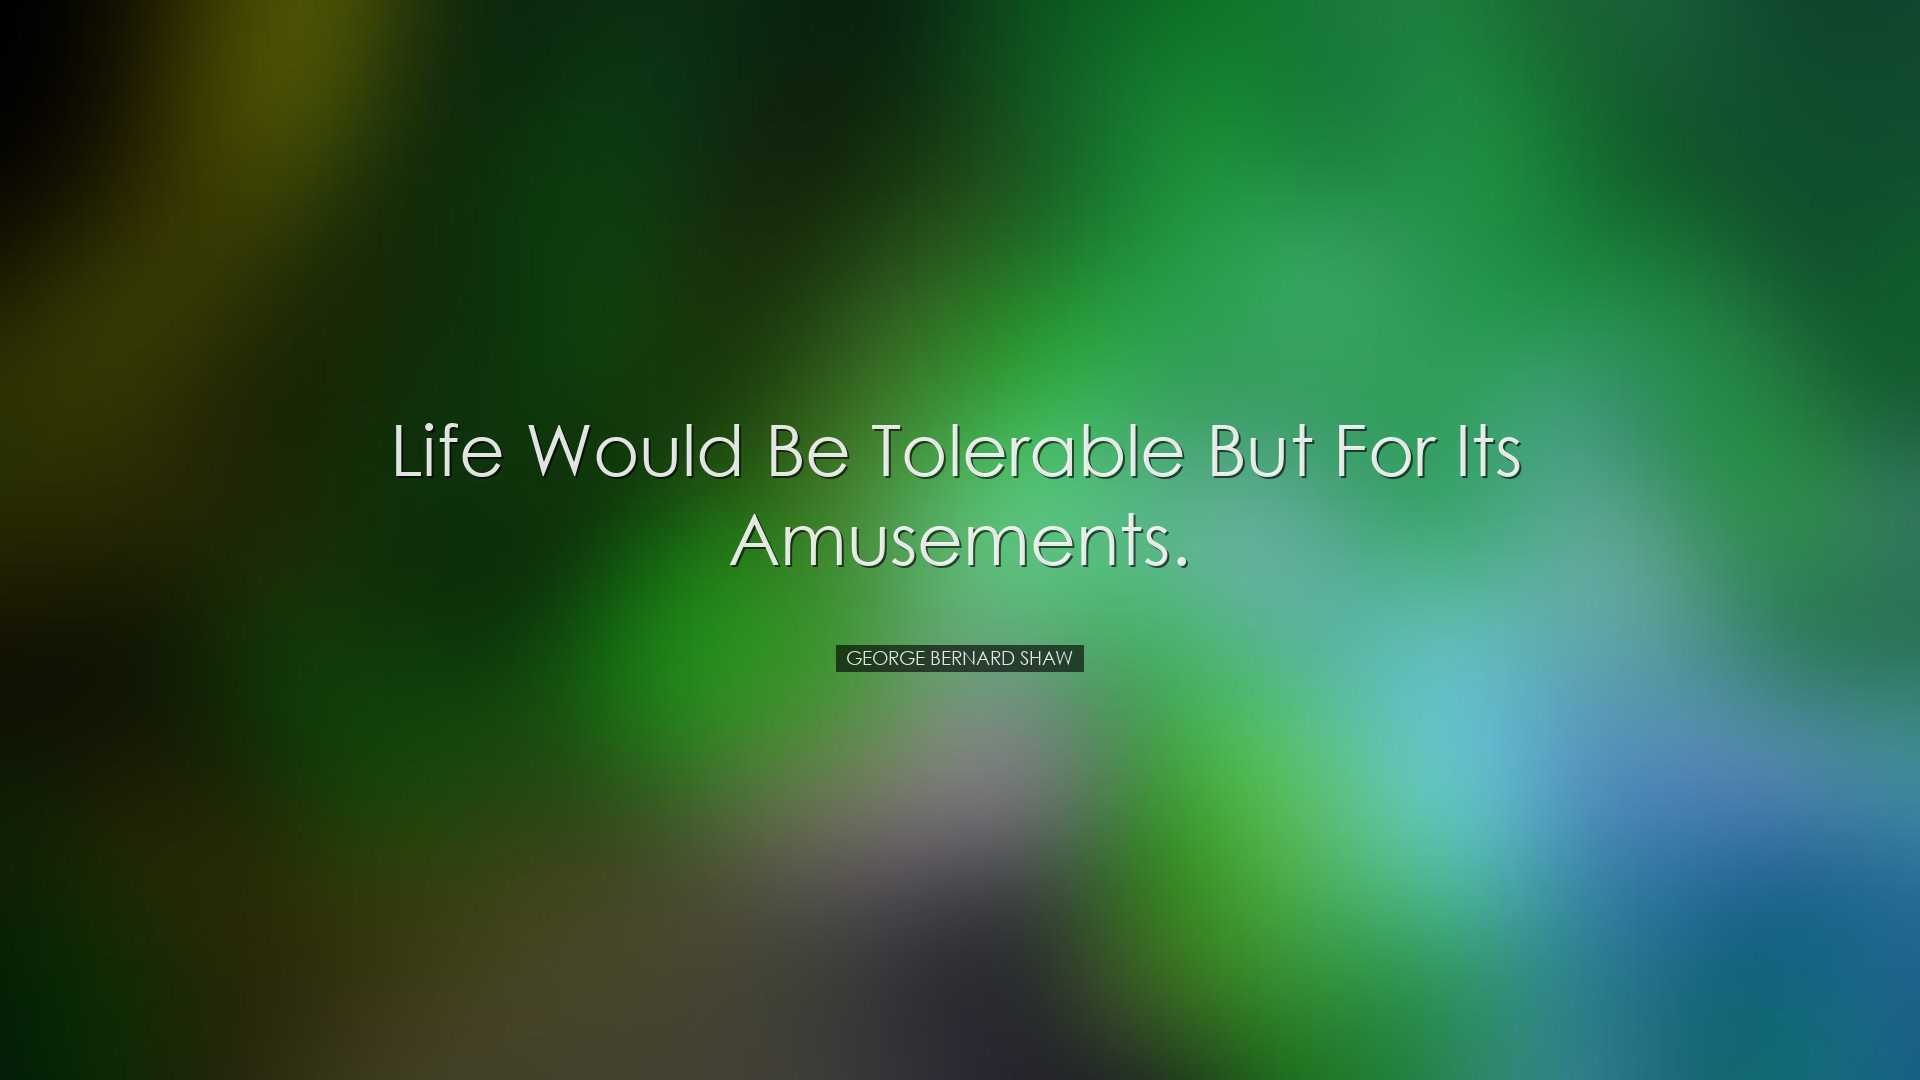 Life would be tolerable but for its amusements. - George Bernard S